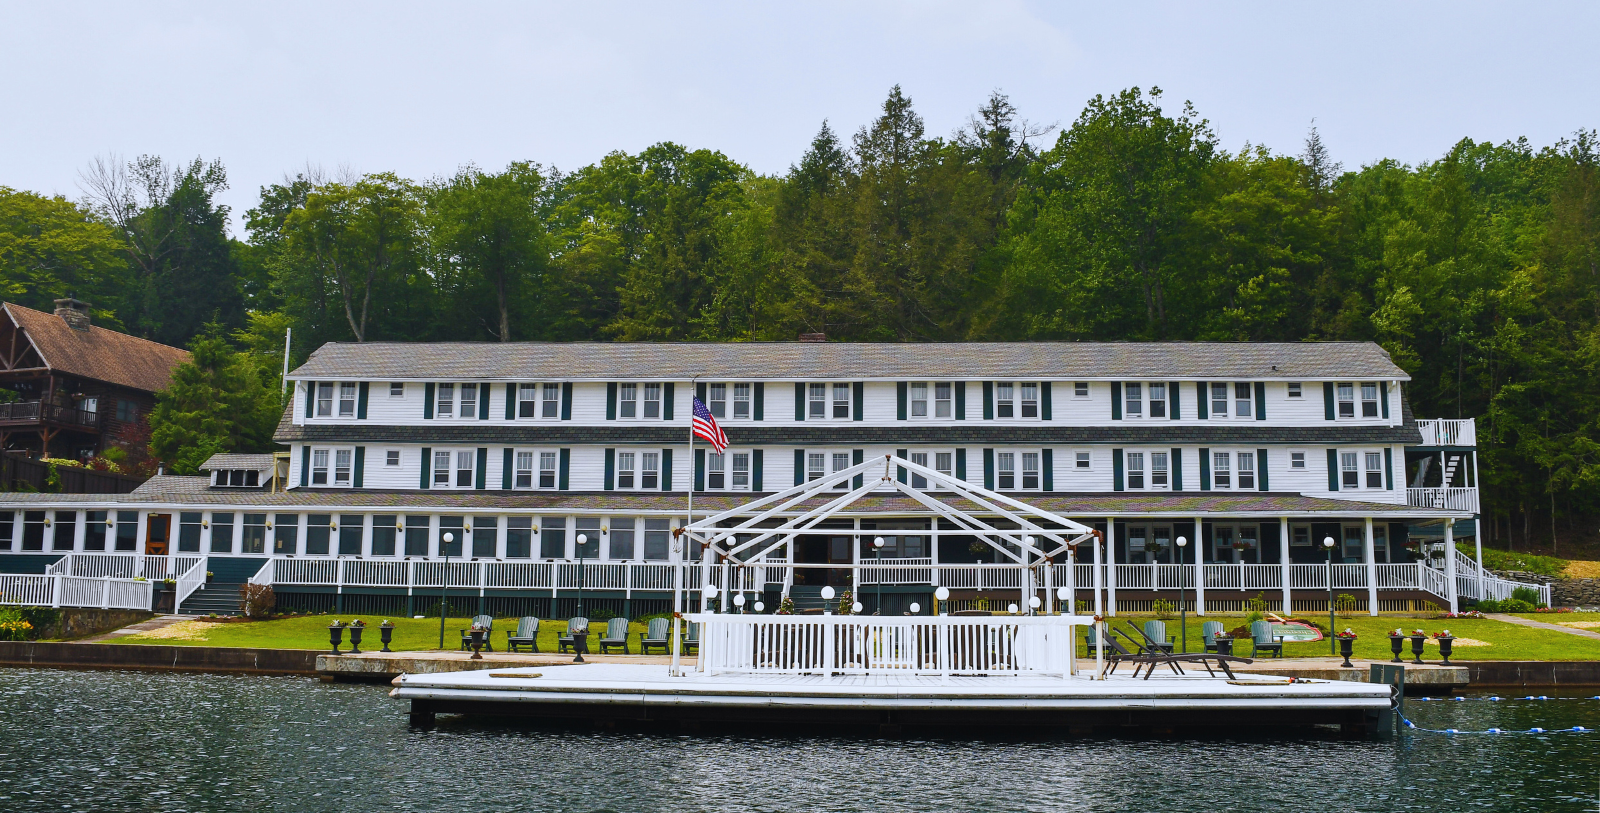 Image of Oquaga Lake and exterior of The Chestnut Inn, 1927, Member of Historic Hotels of America since 2023, in Deposit, New York